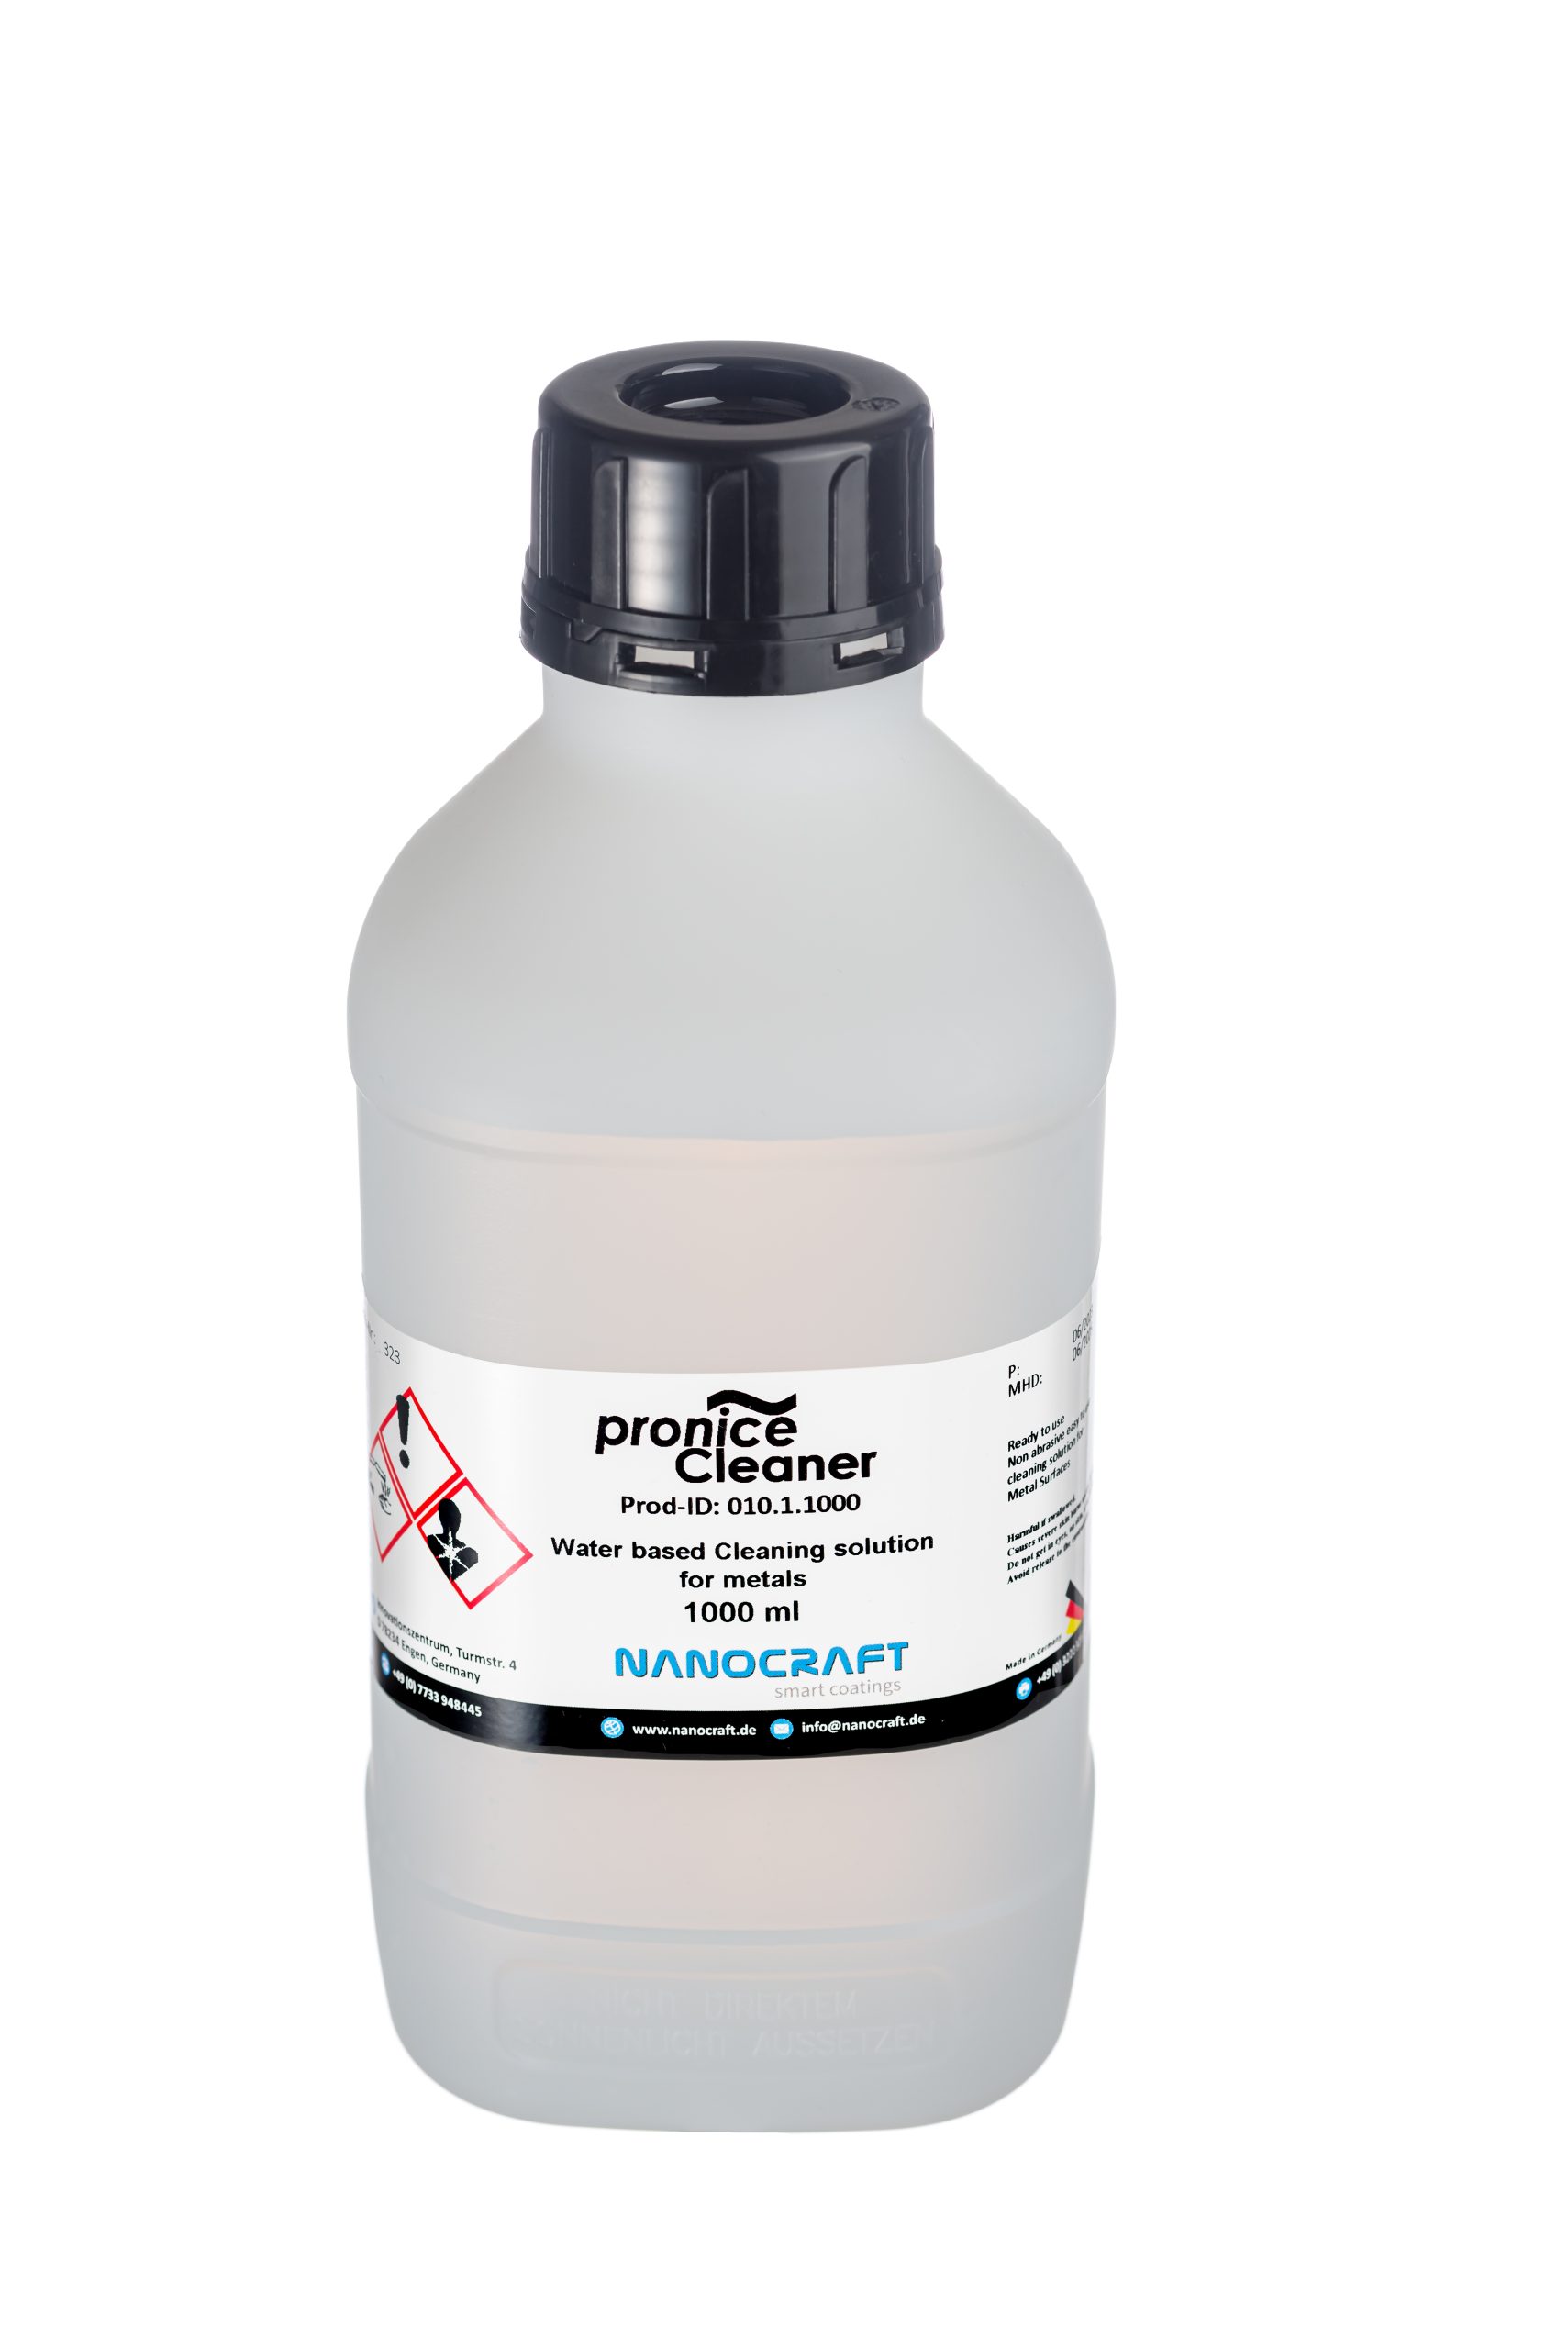 Pronice Cleaner is a chemical cleaning of silver surface